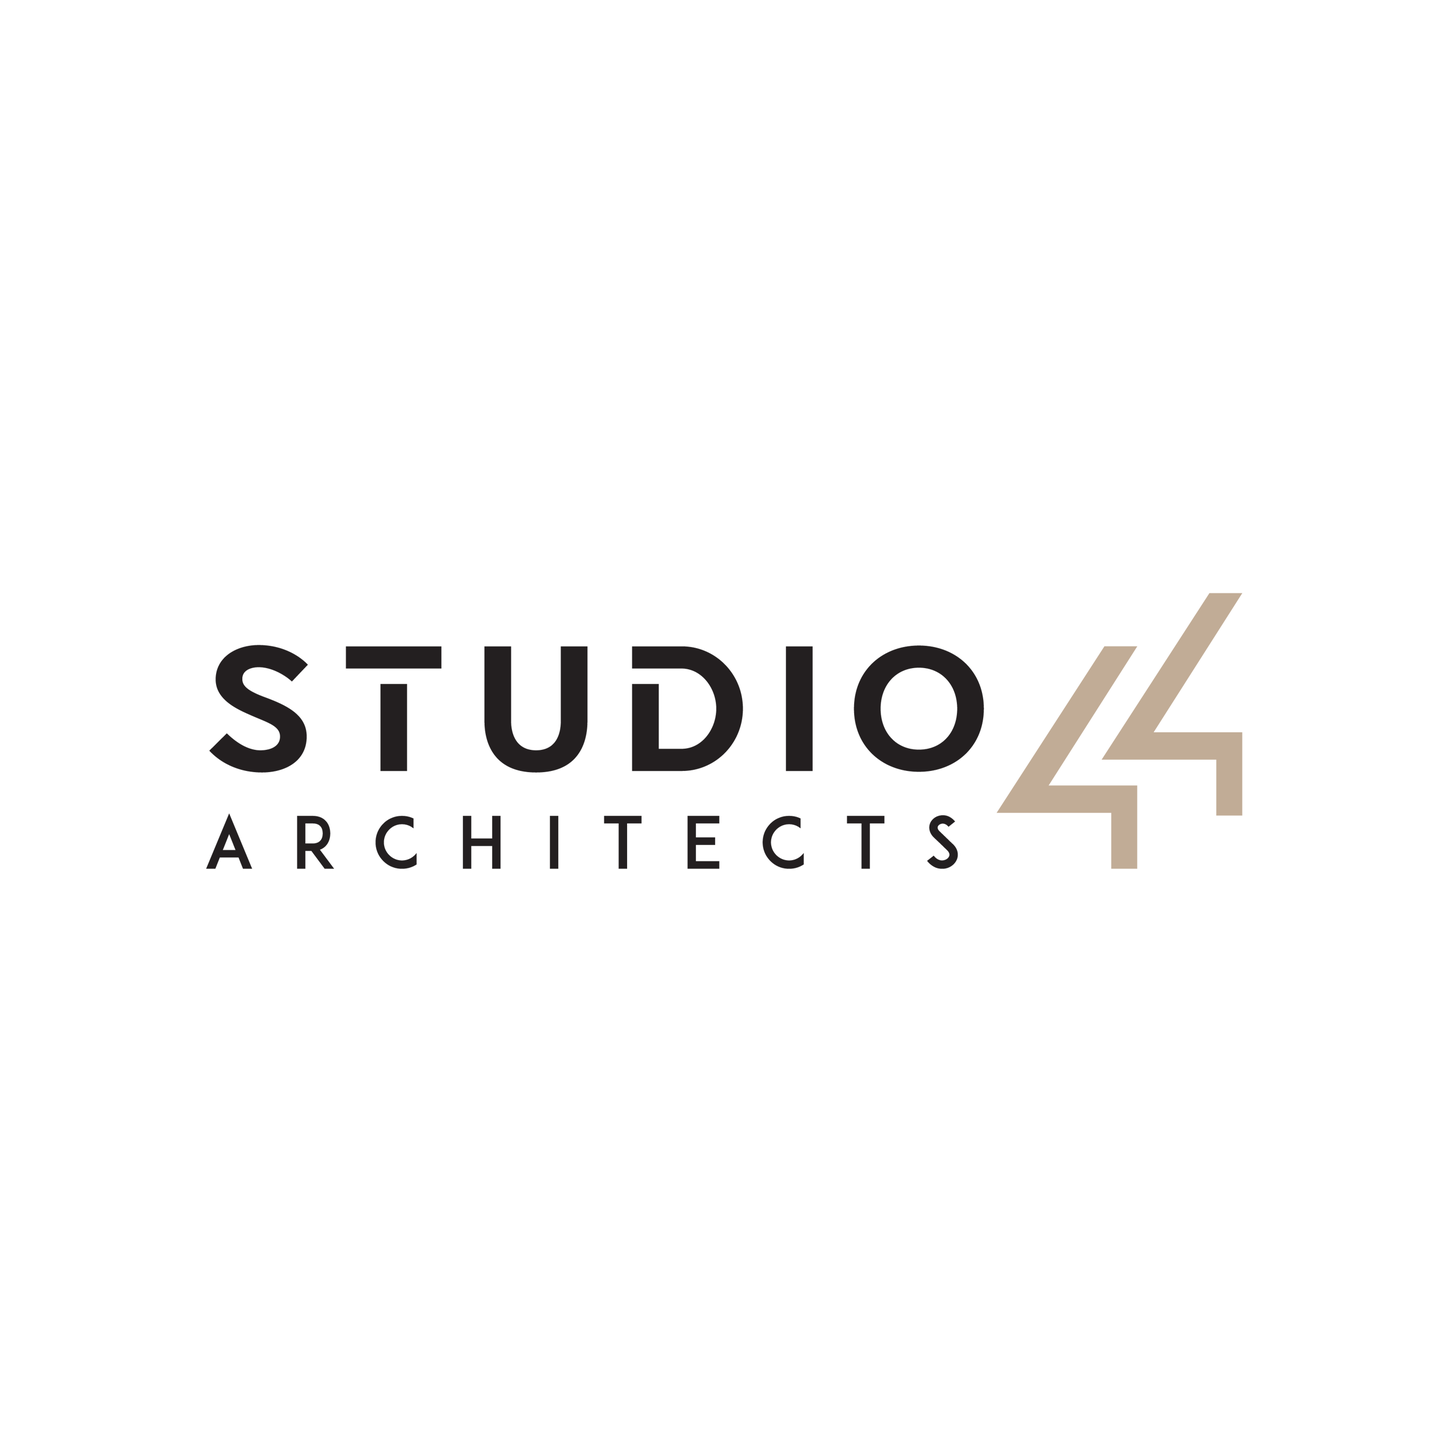 Studio44 Architects|Accounting Services|Professional Services